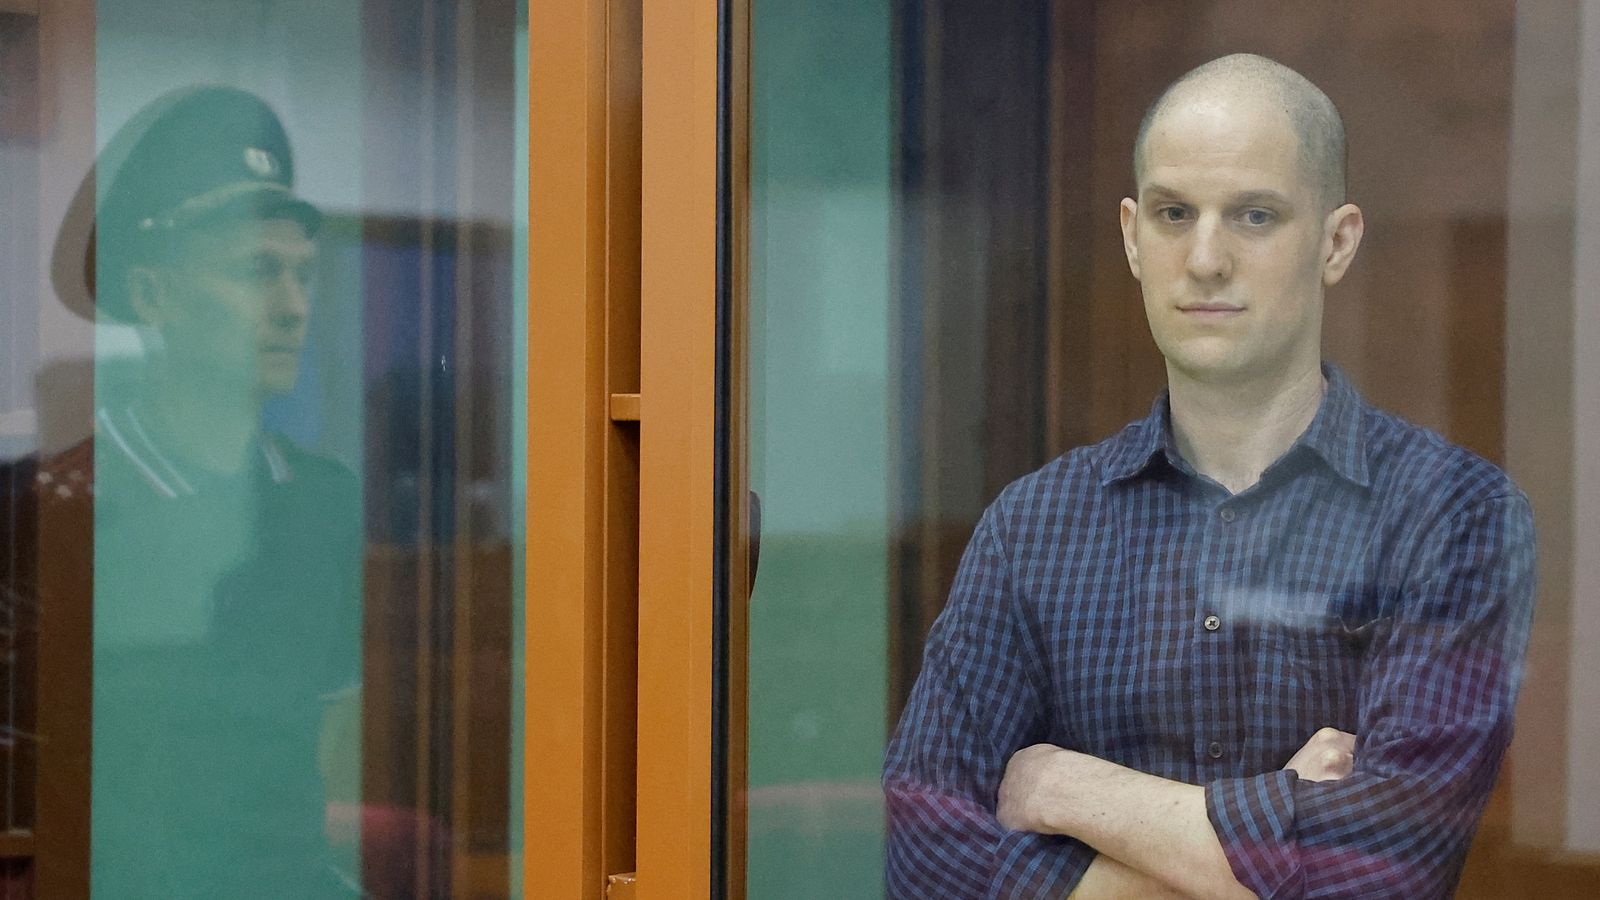 Evan Gershkovich: US journalist seen with shaved head as he goes on trial in Russia for spying